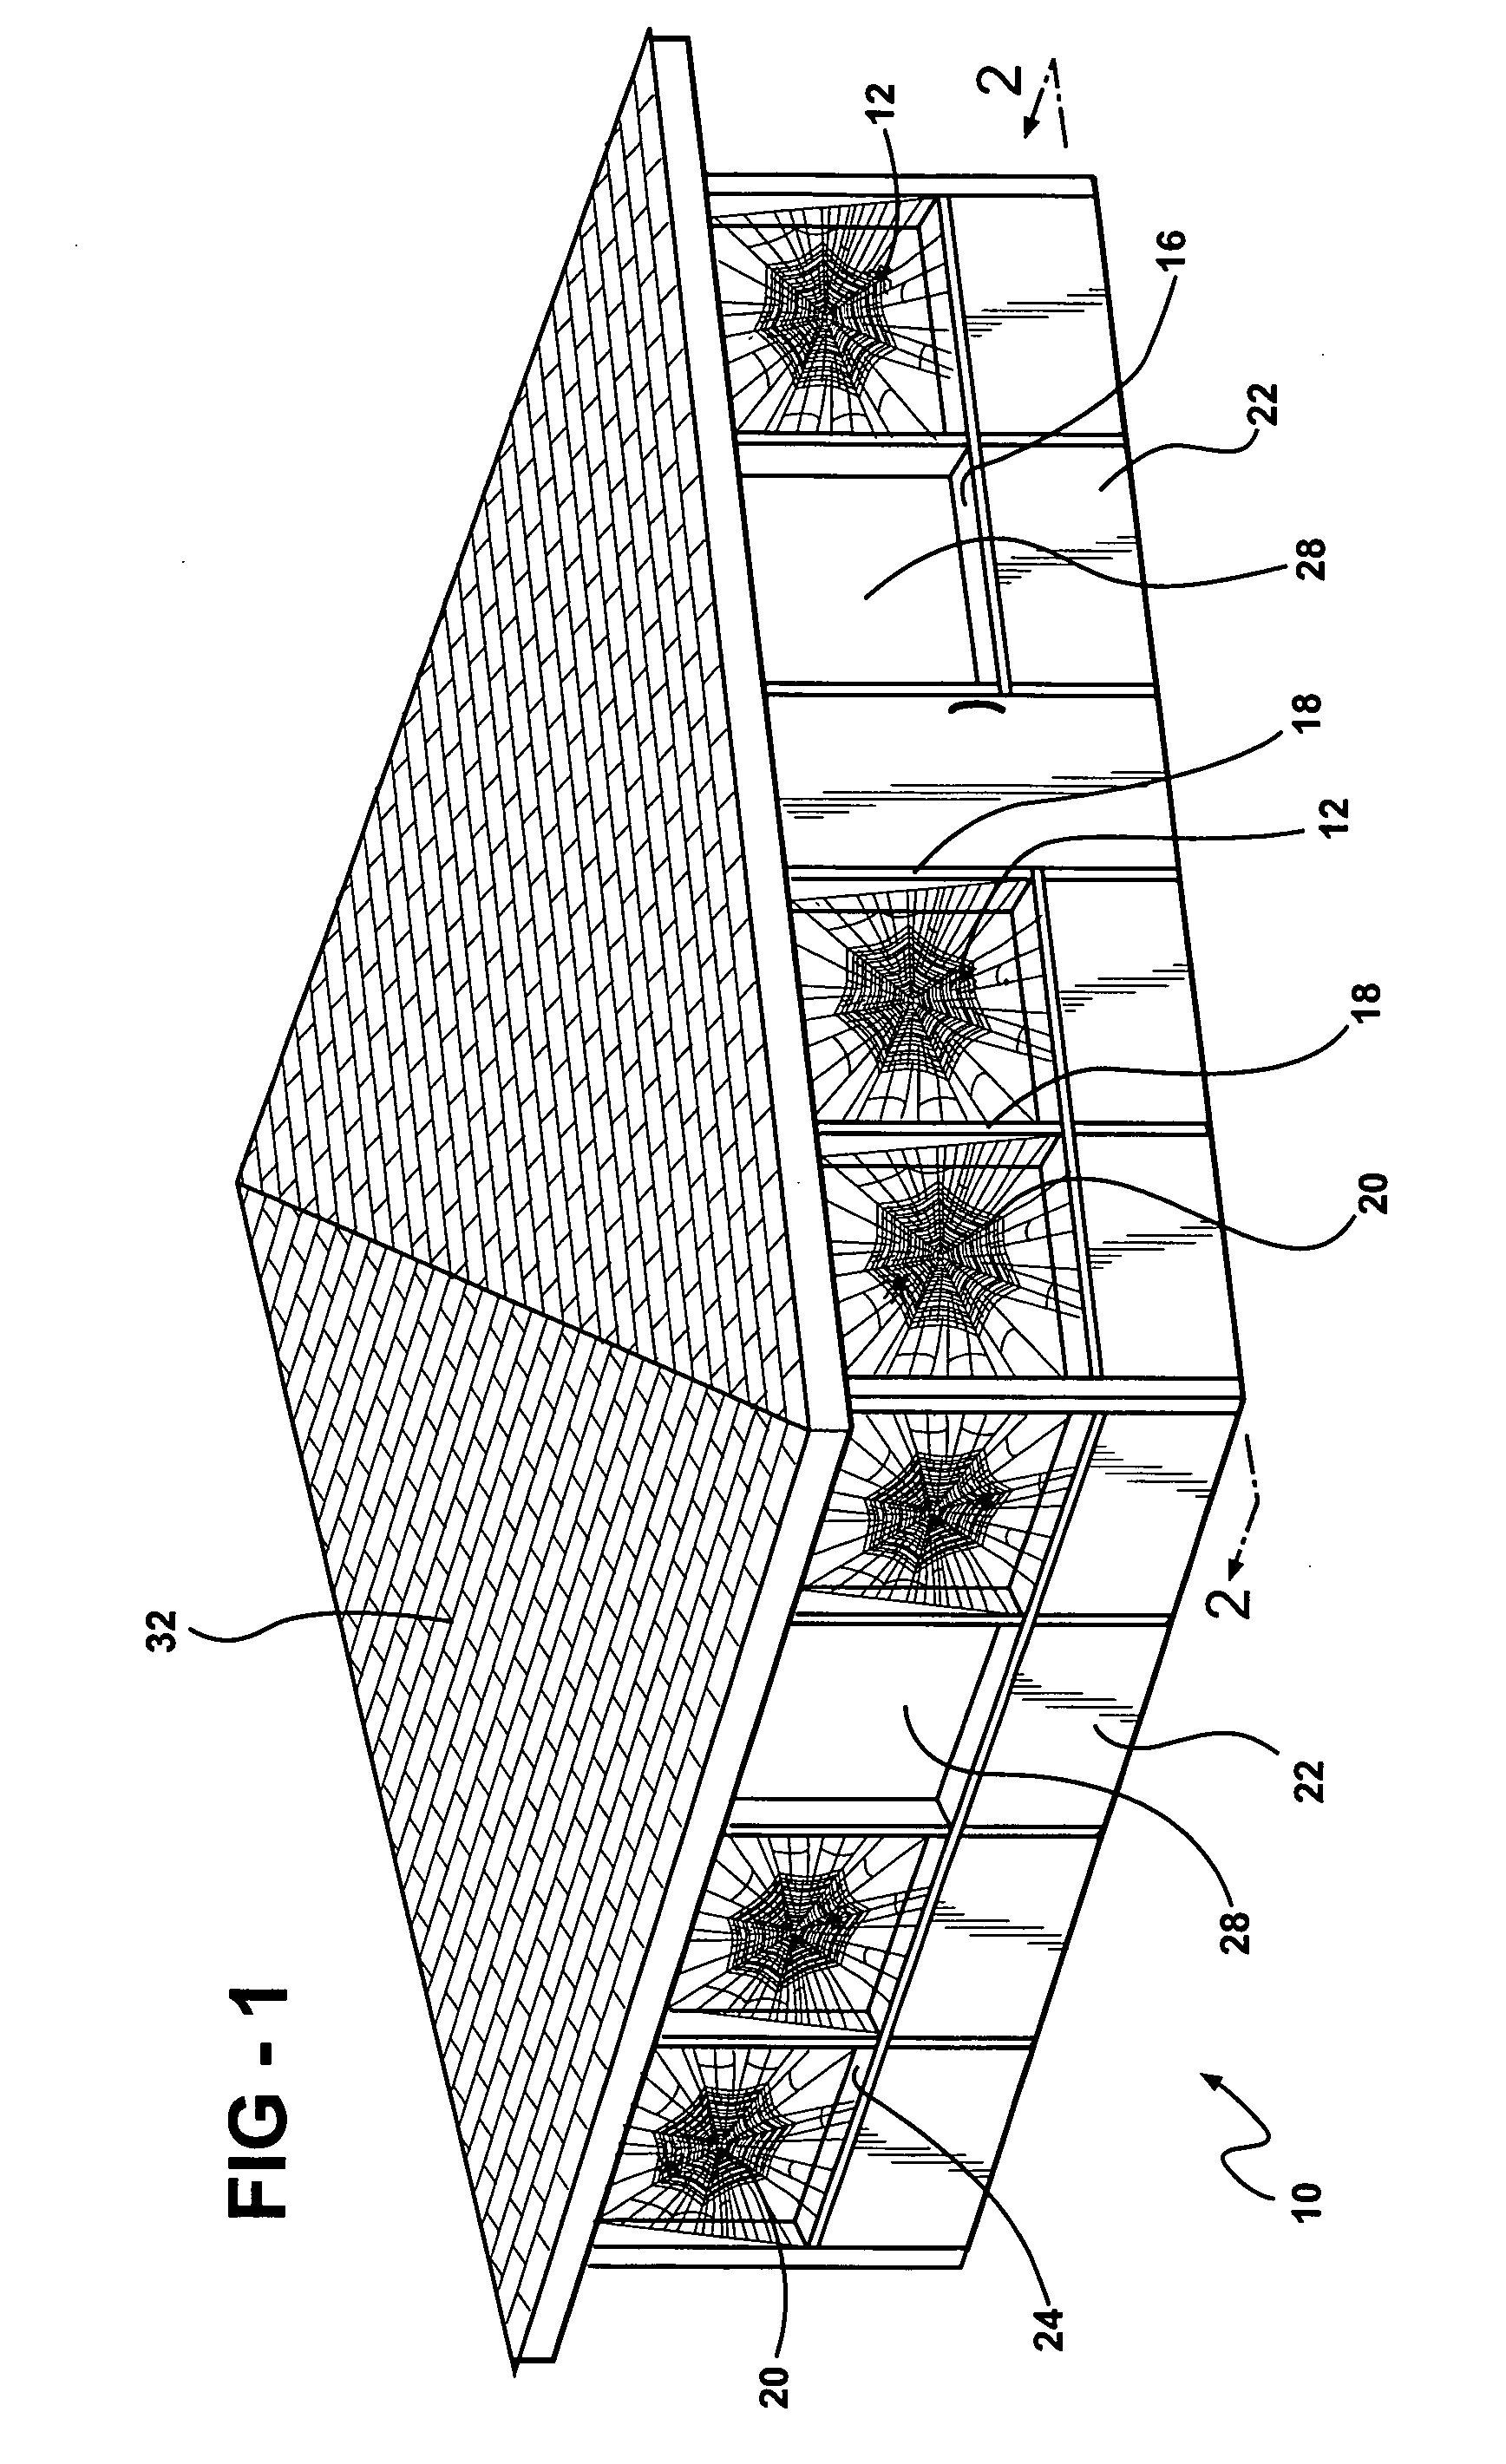 Method and housing assembly for farming members of the phylum arthropoda